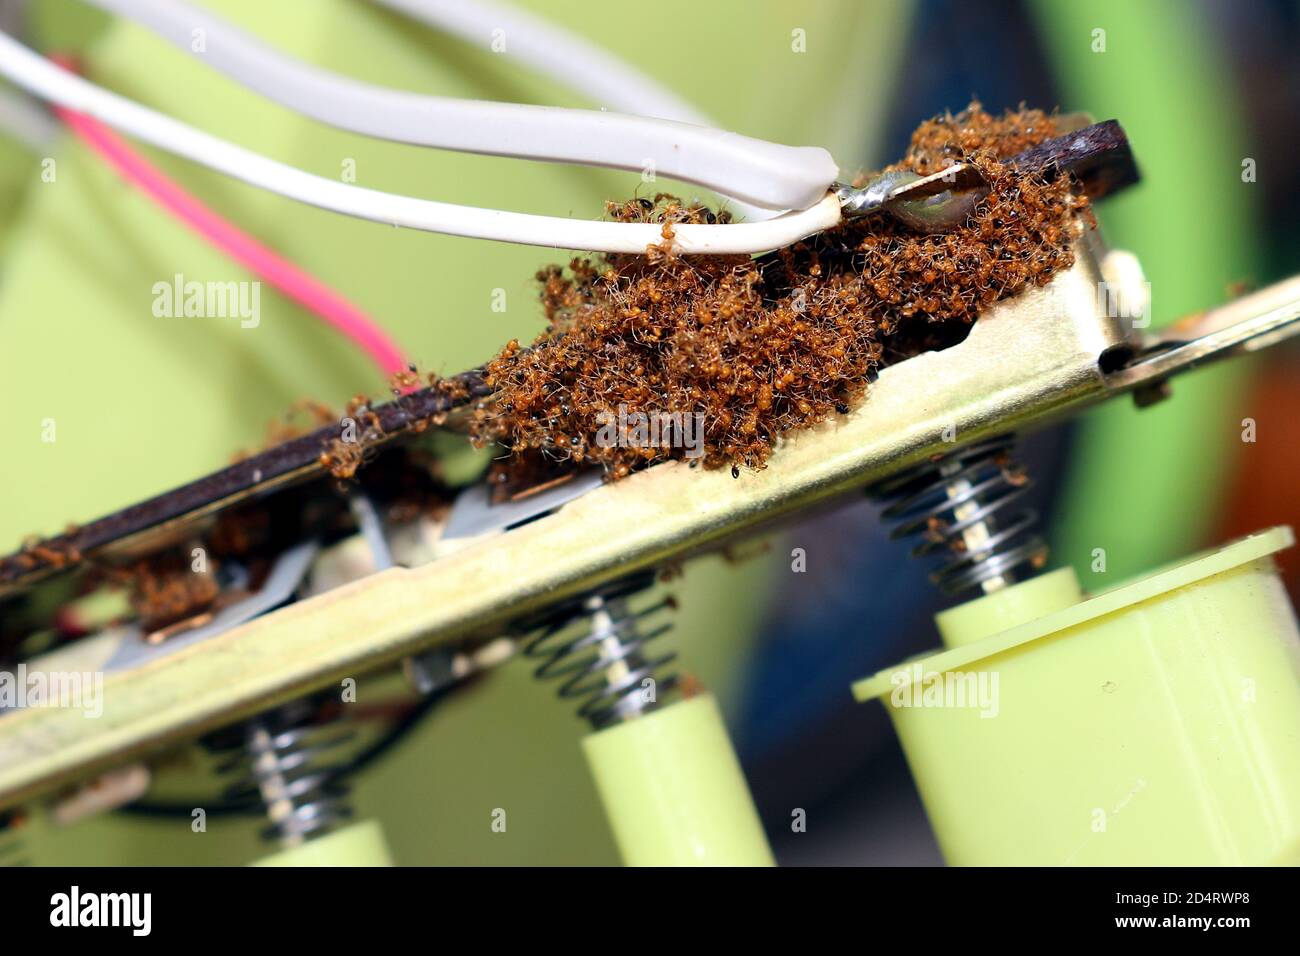 The remains of dead ants were clustered together in the fan switch. Stock Photo